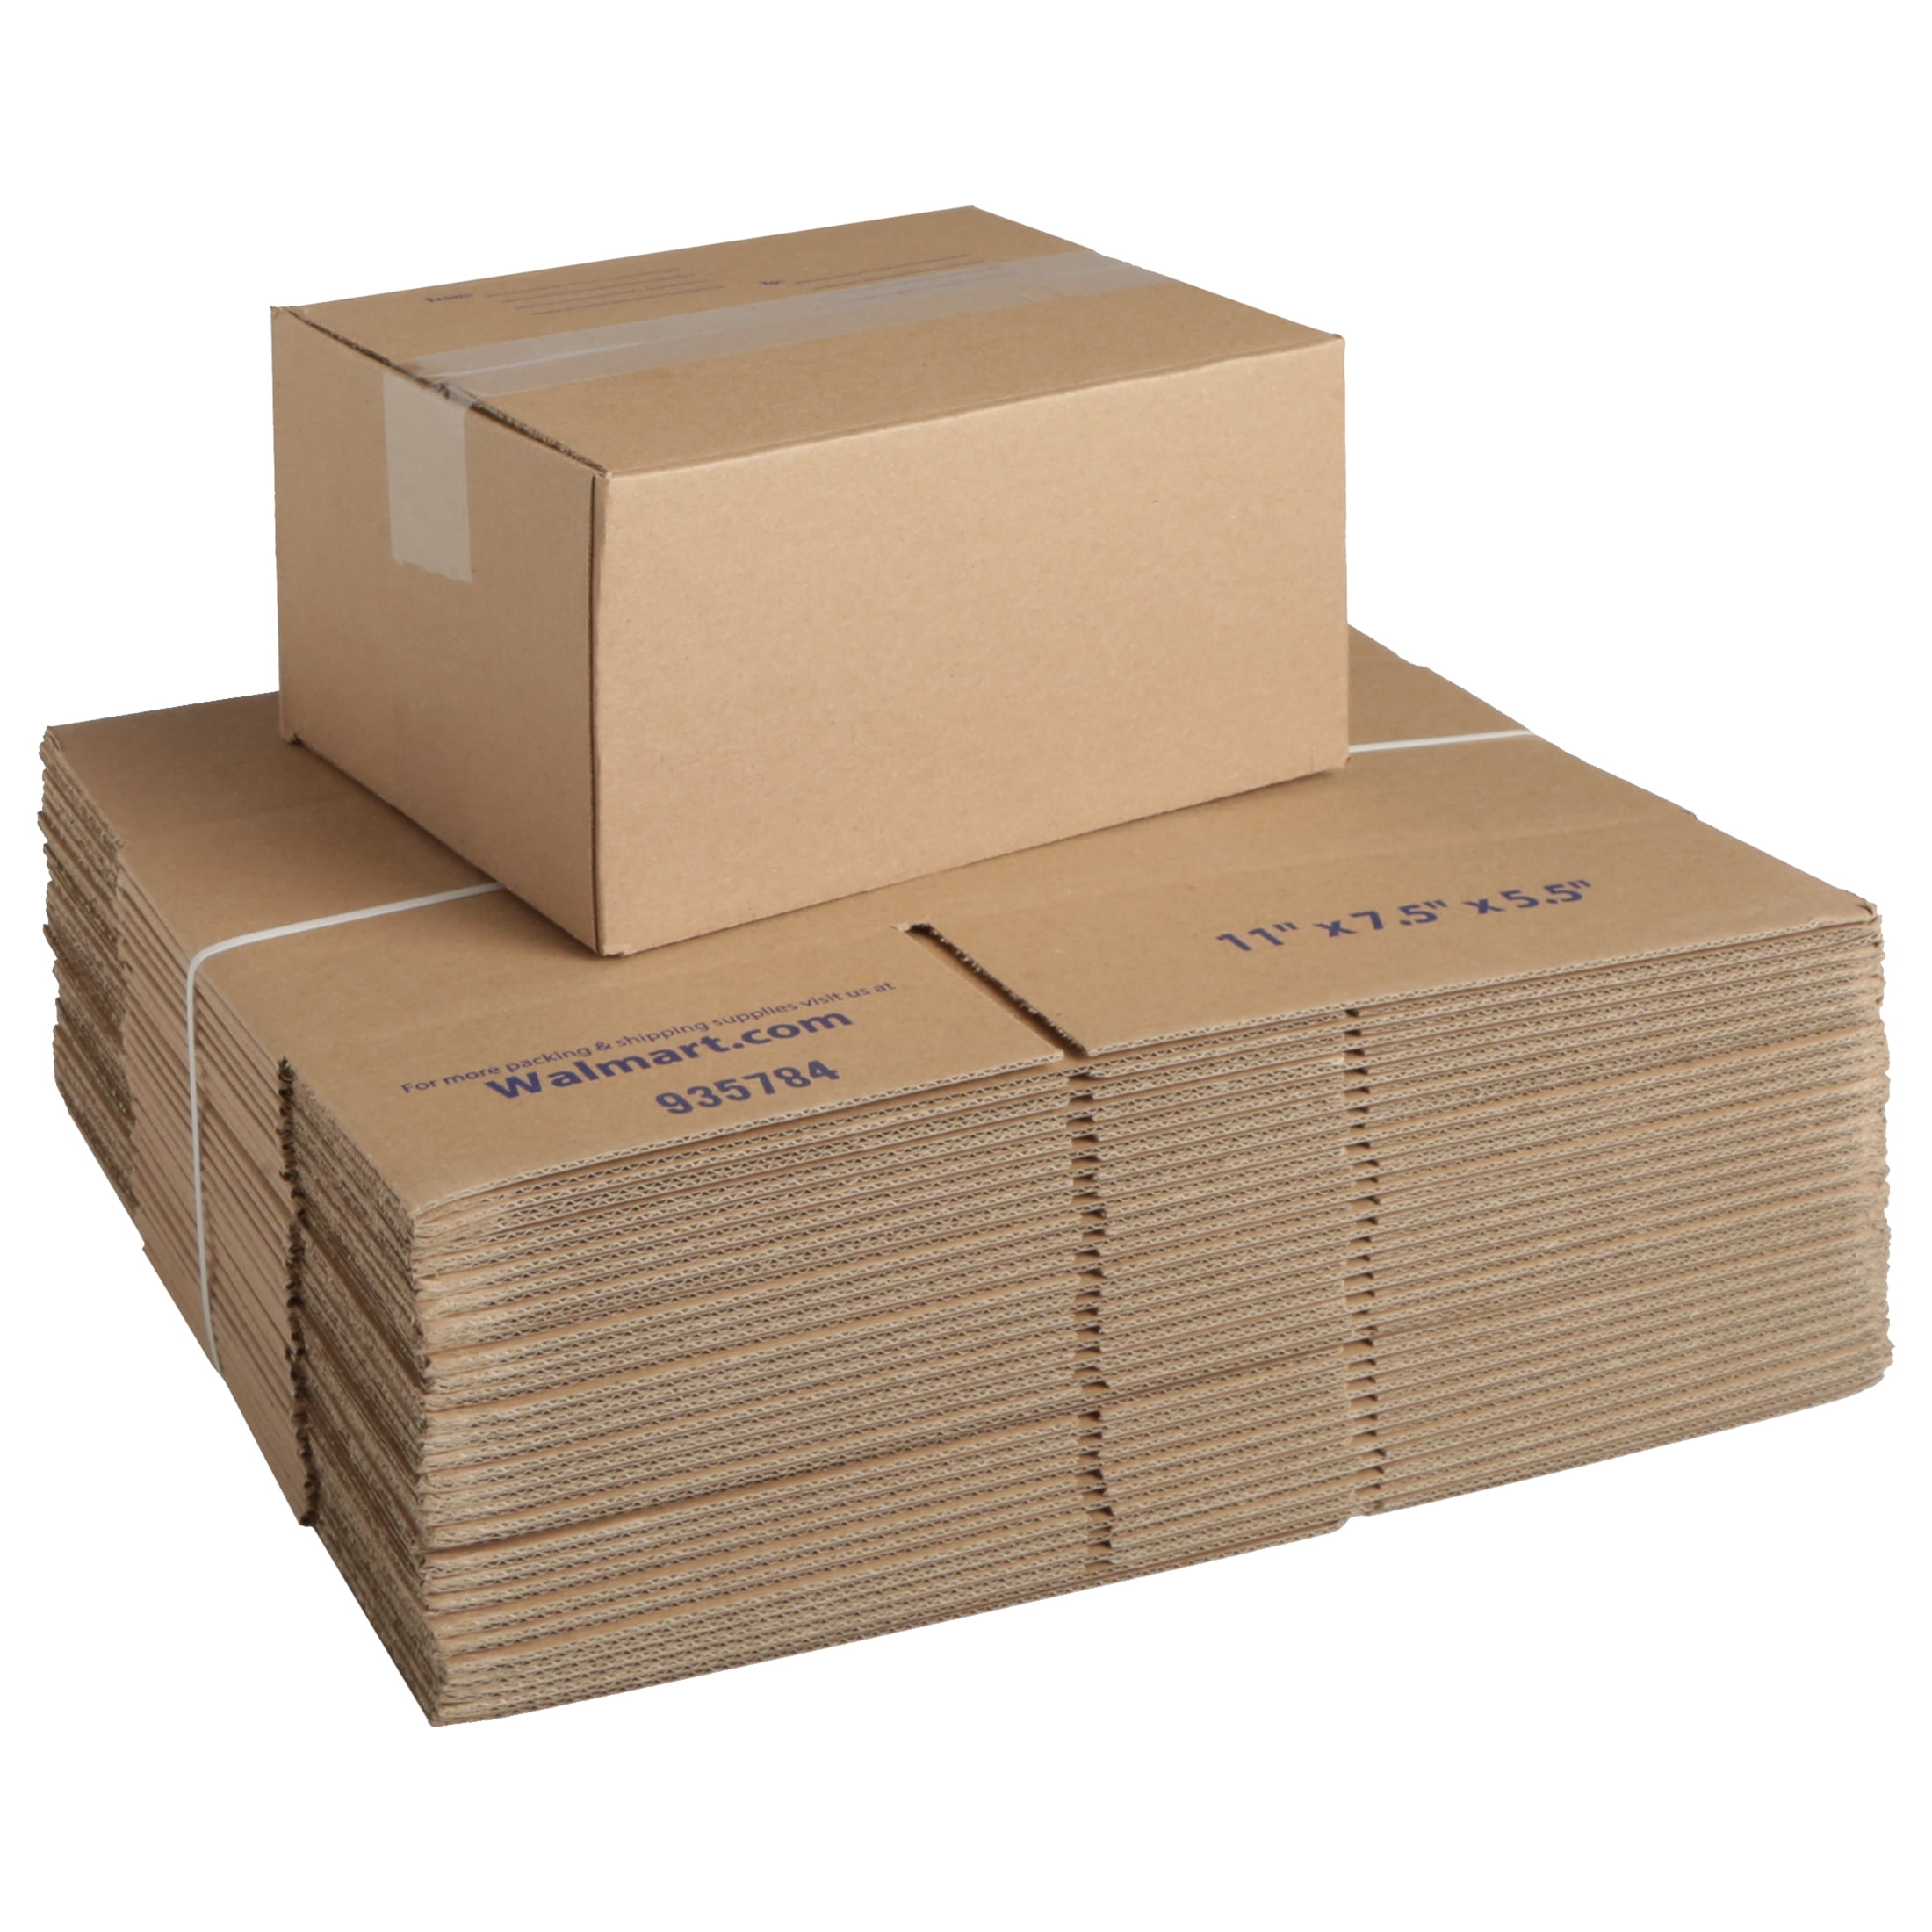 8 x 8 x 2" Flat Corrugated Boxes 25/Bundle Brown Shipping/Moving/Packing Boxes 